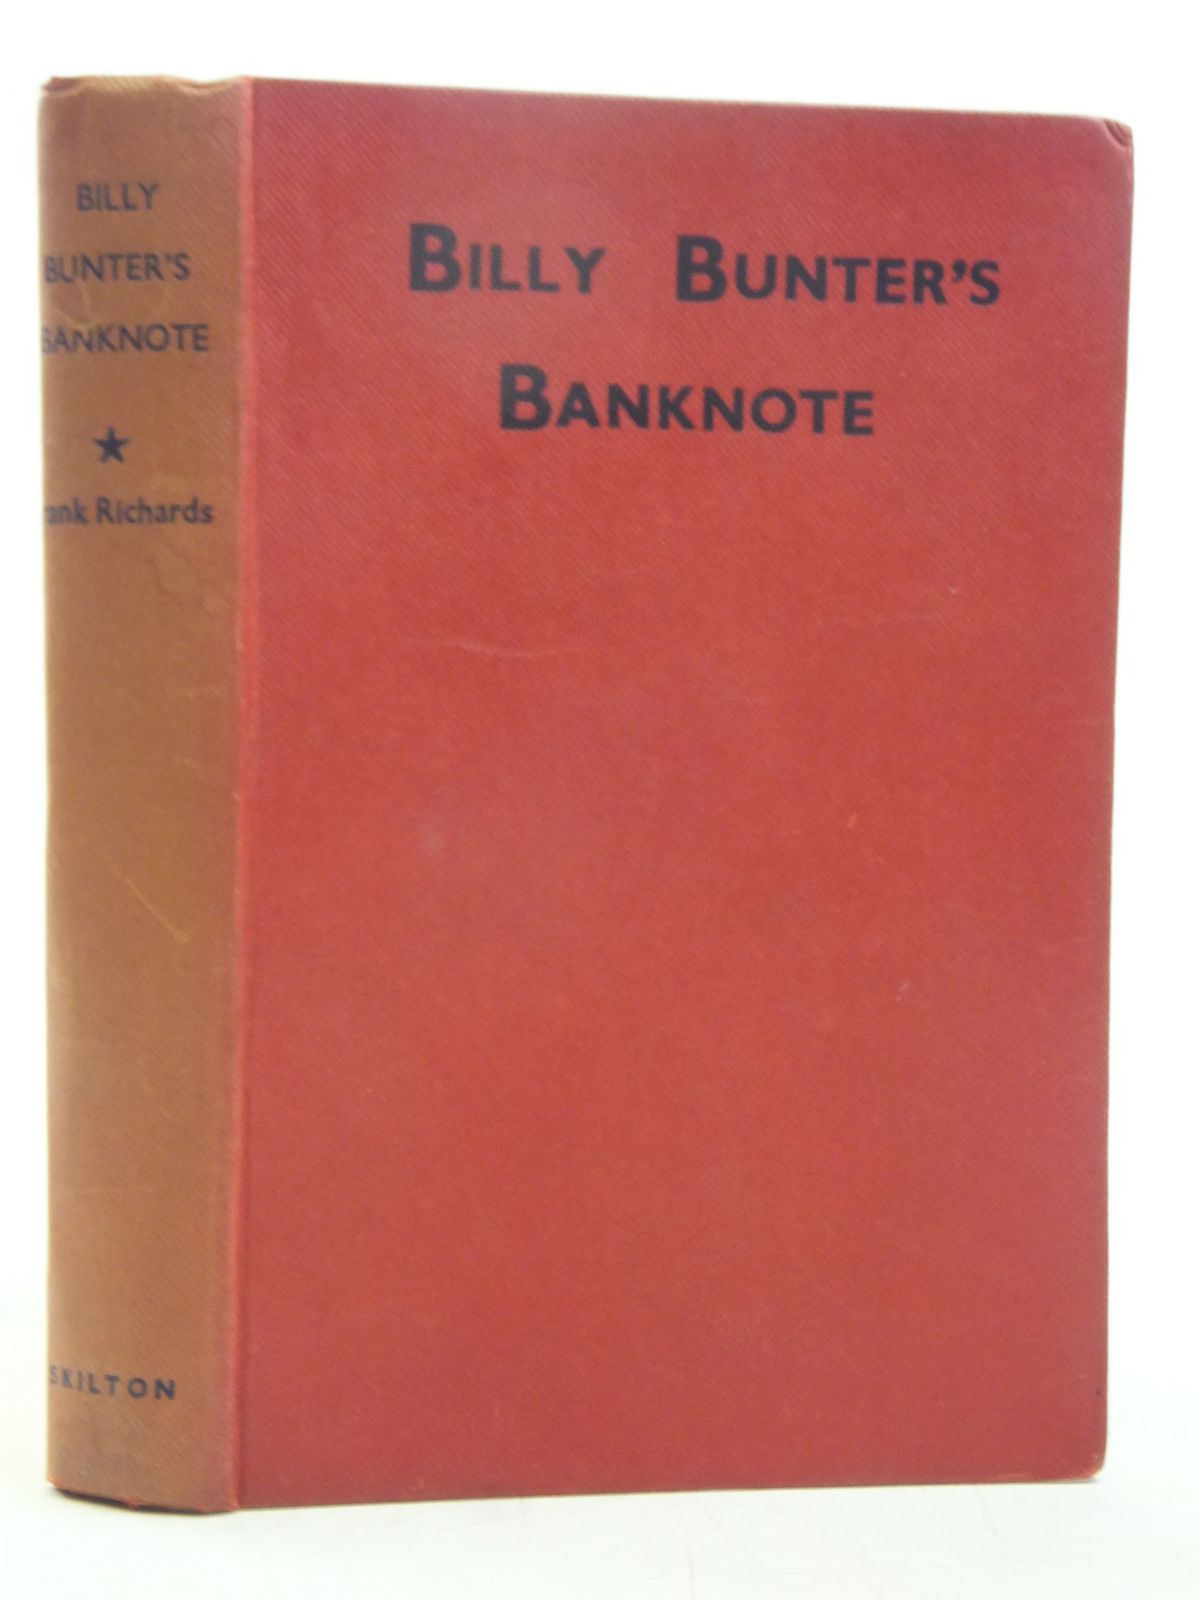 Photo of BILLY BUNTER'S BANKNOTE written by Richards, Frank illustrated by Macdonald, R.J. published by Charles Skilton Ltd. (STOCK CODE: 2119181)  for sale by Stella & Rose's Books